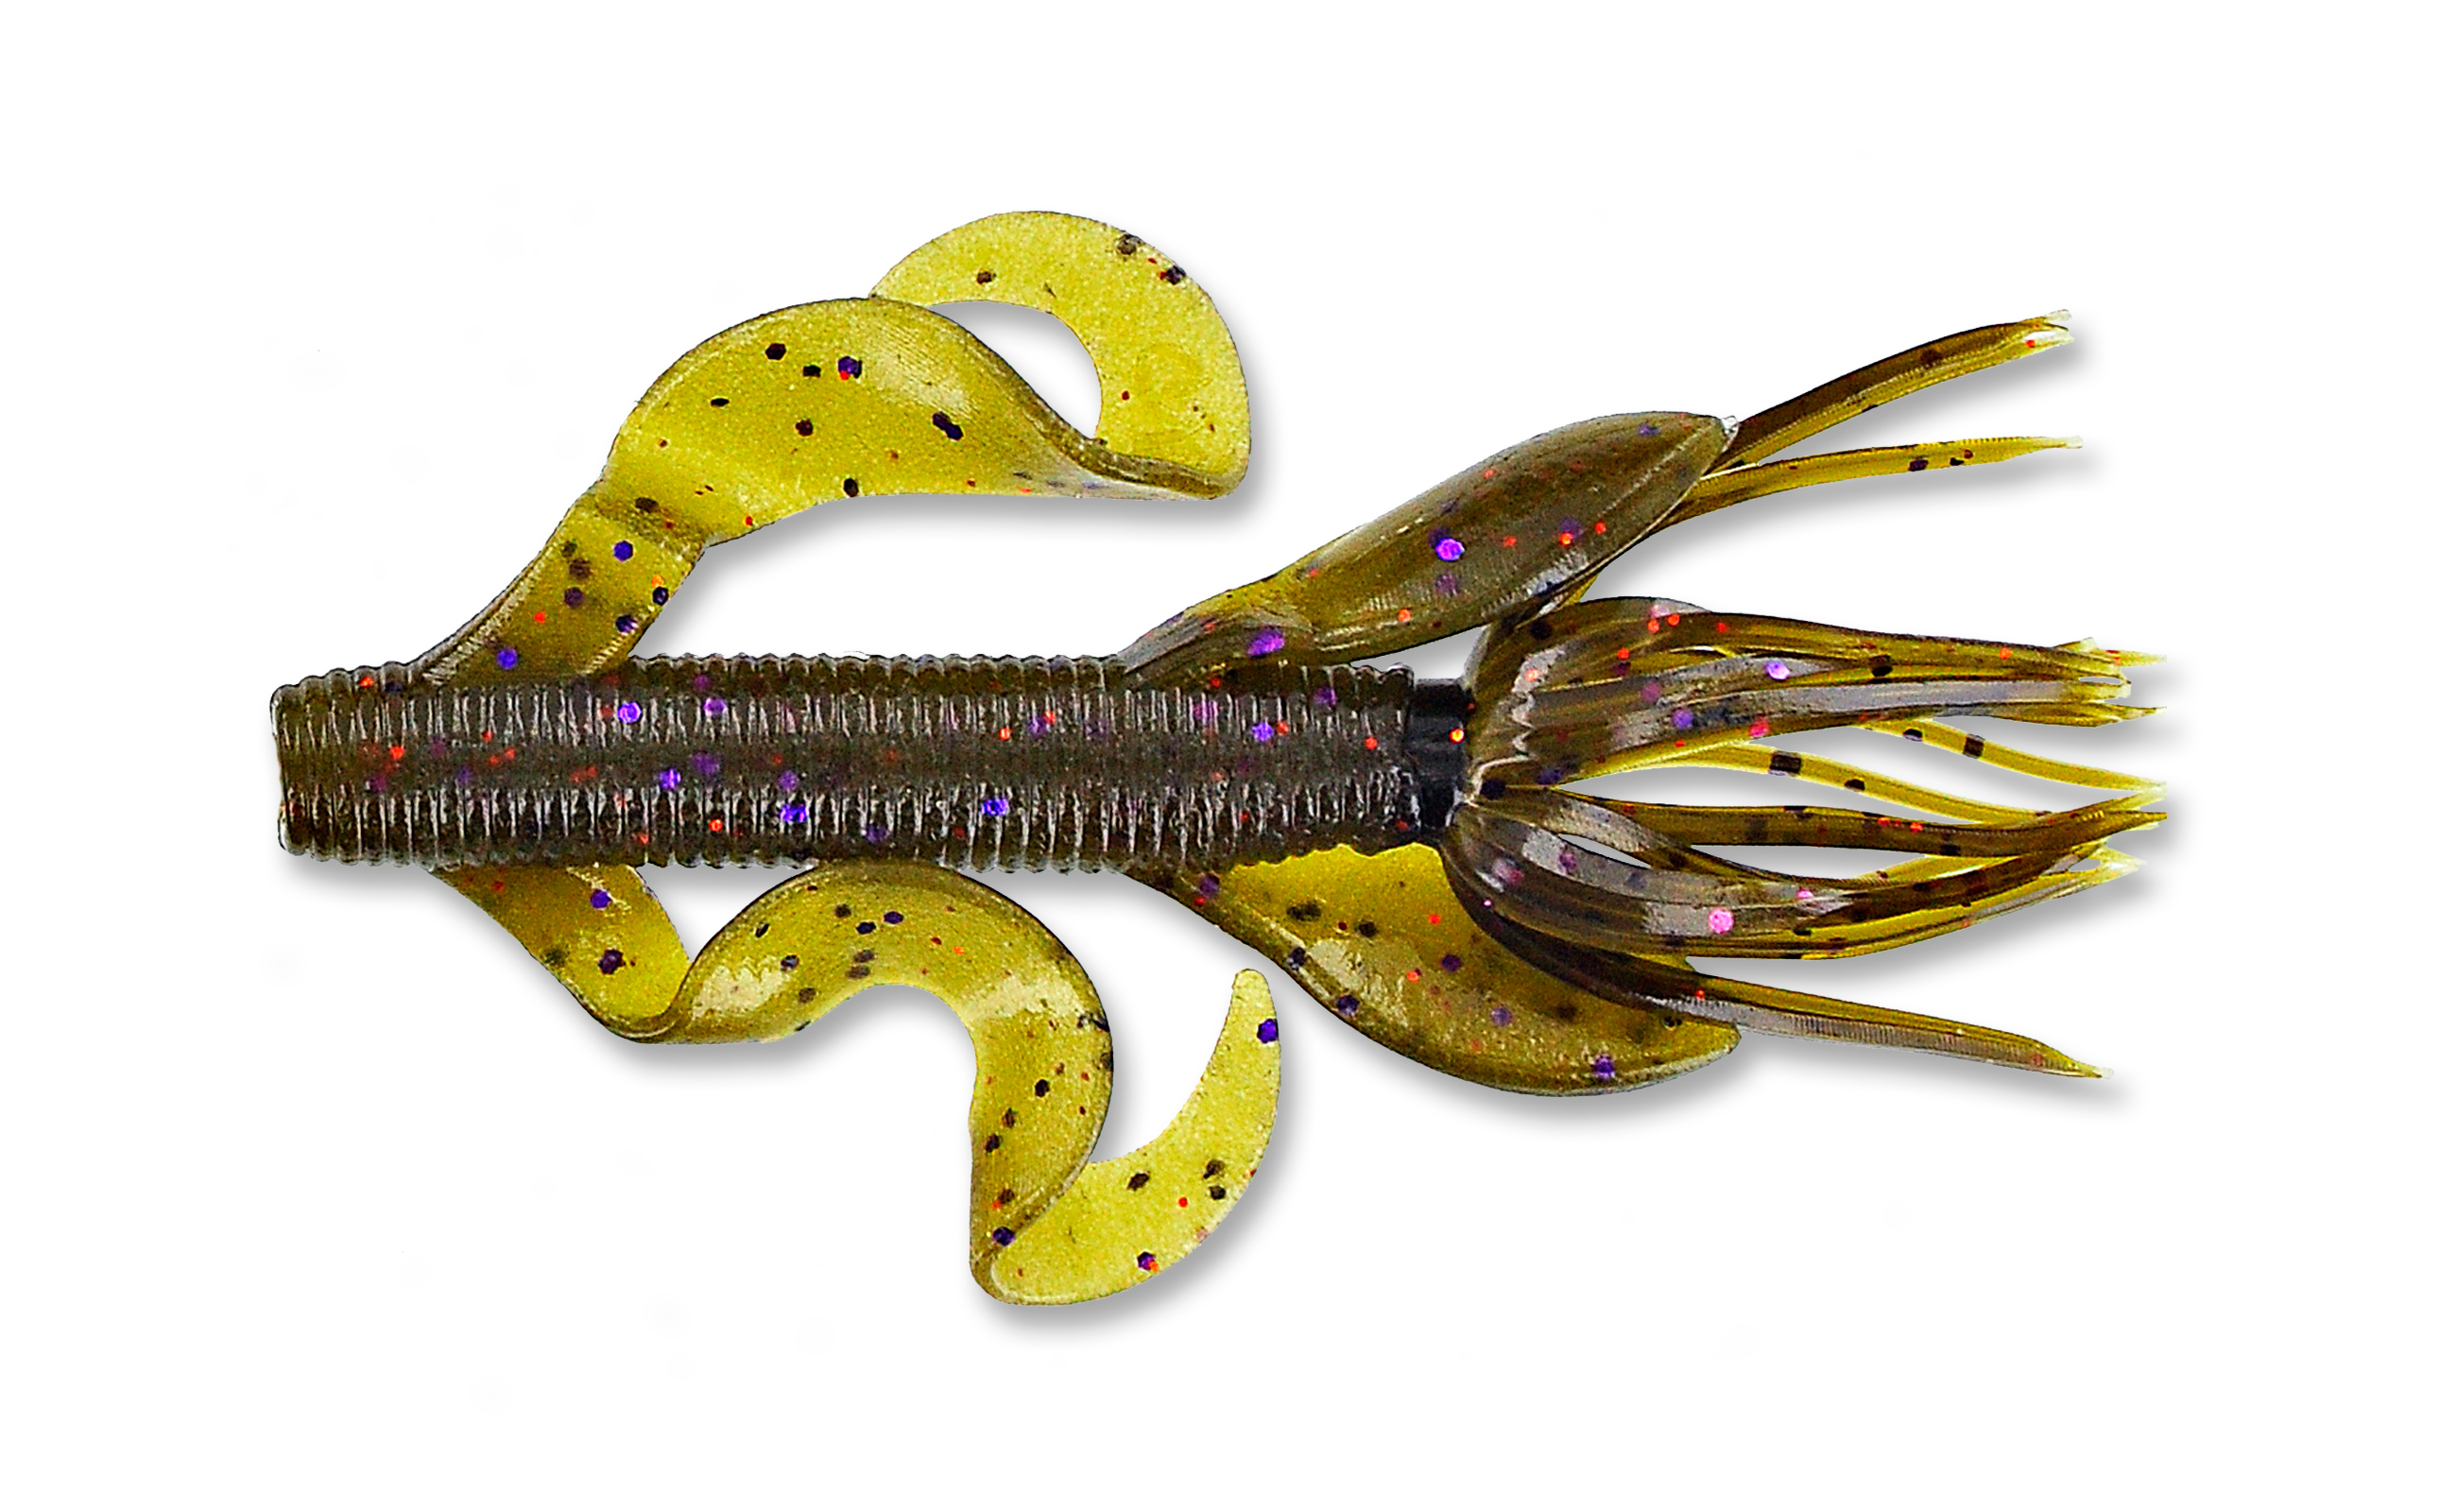 Yamamoto Baits Kreature Soft Bait  Up to 26% Off Free Shipping over $49!